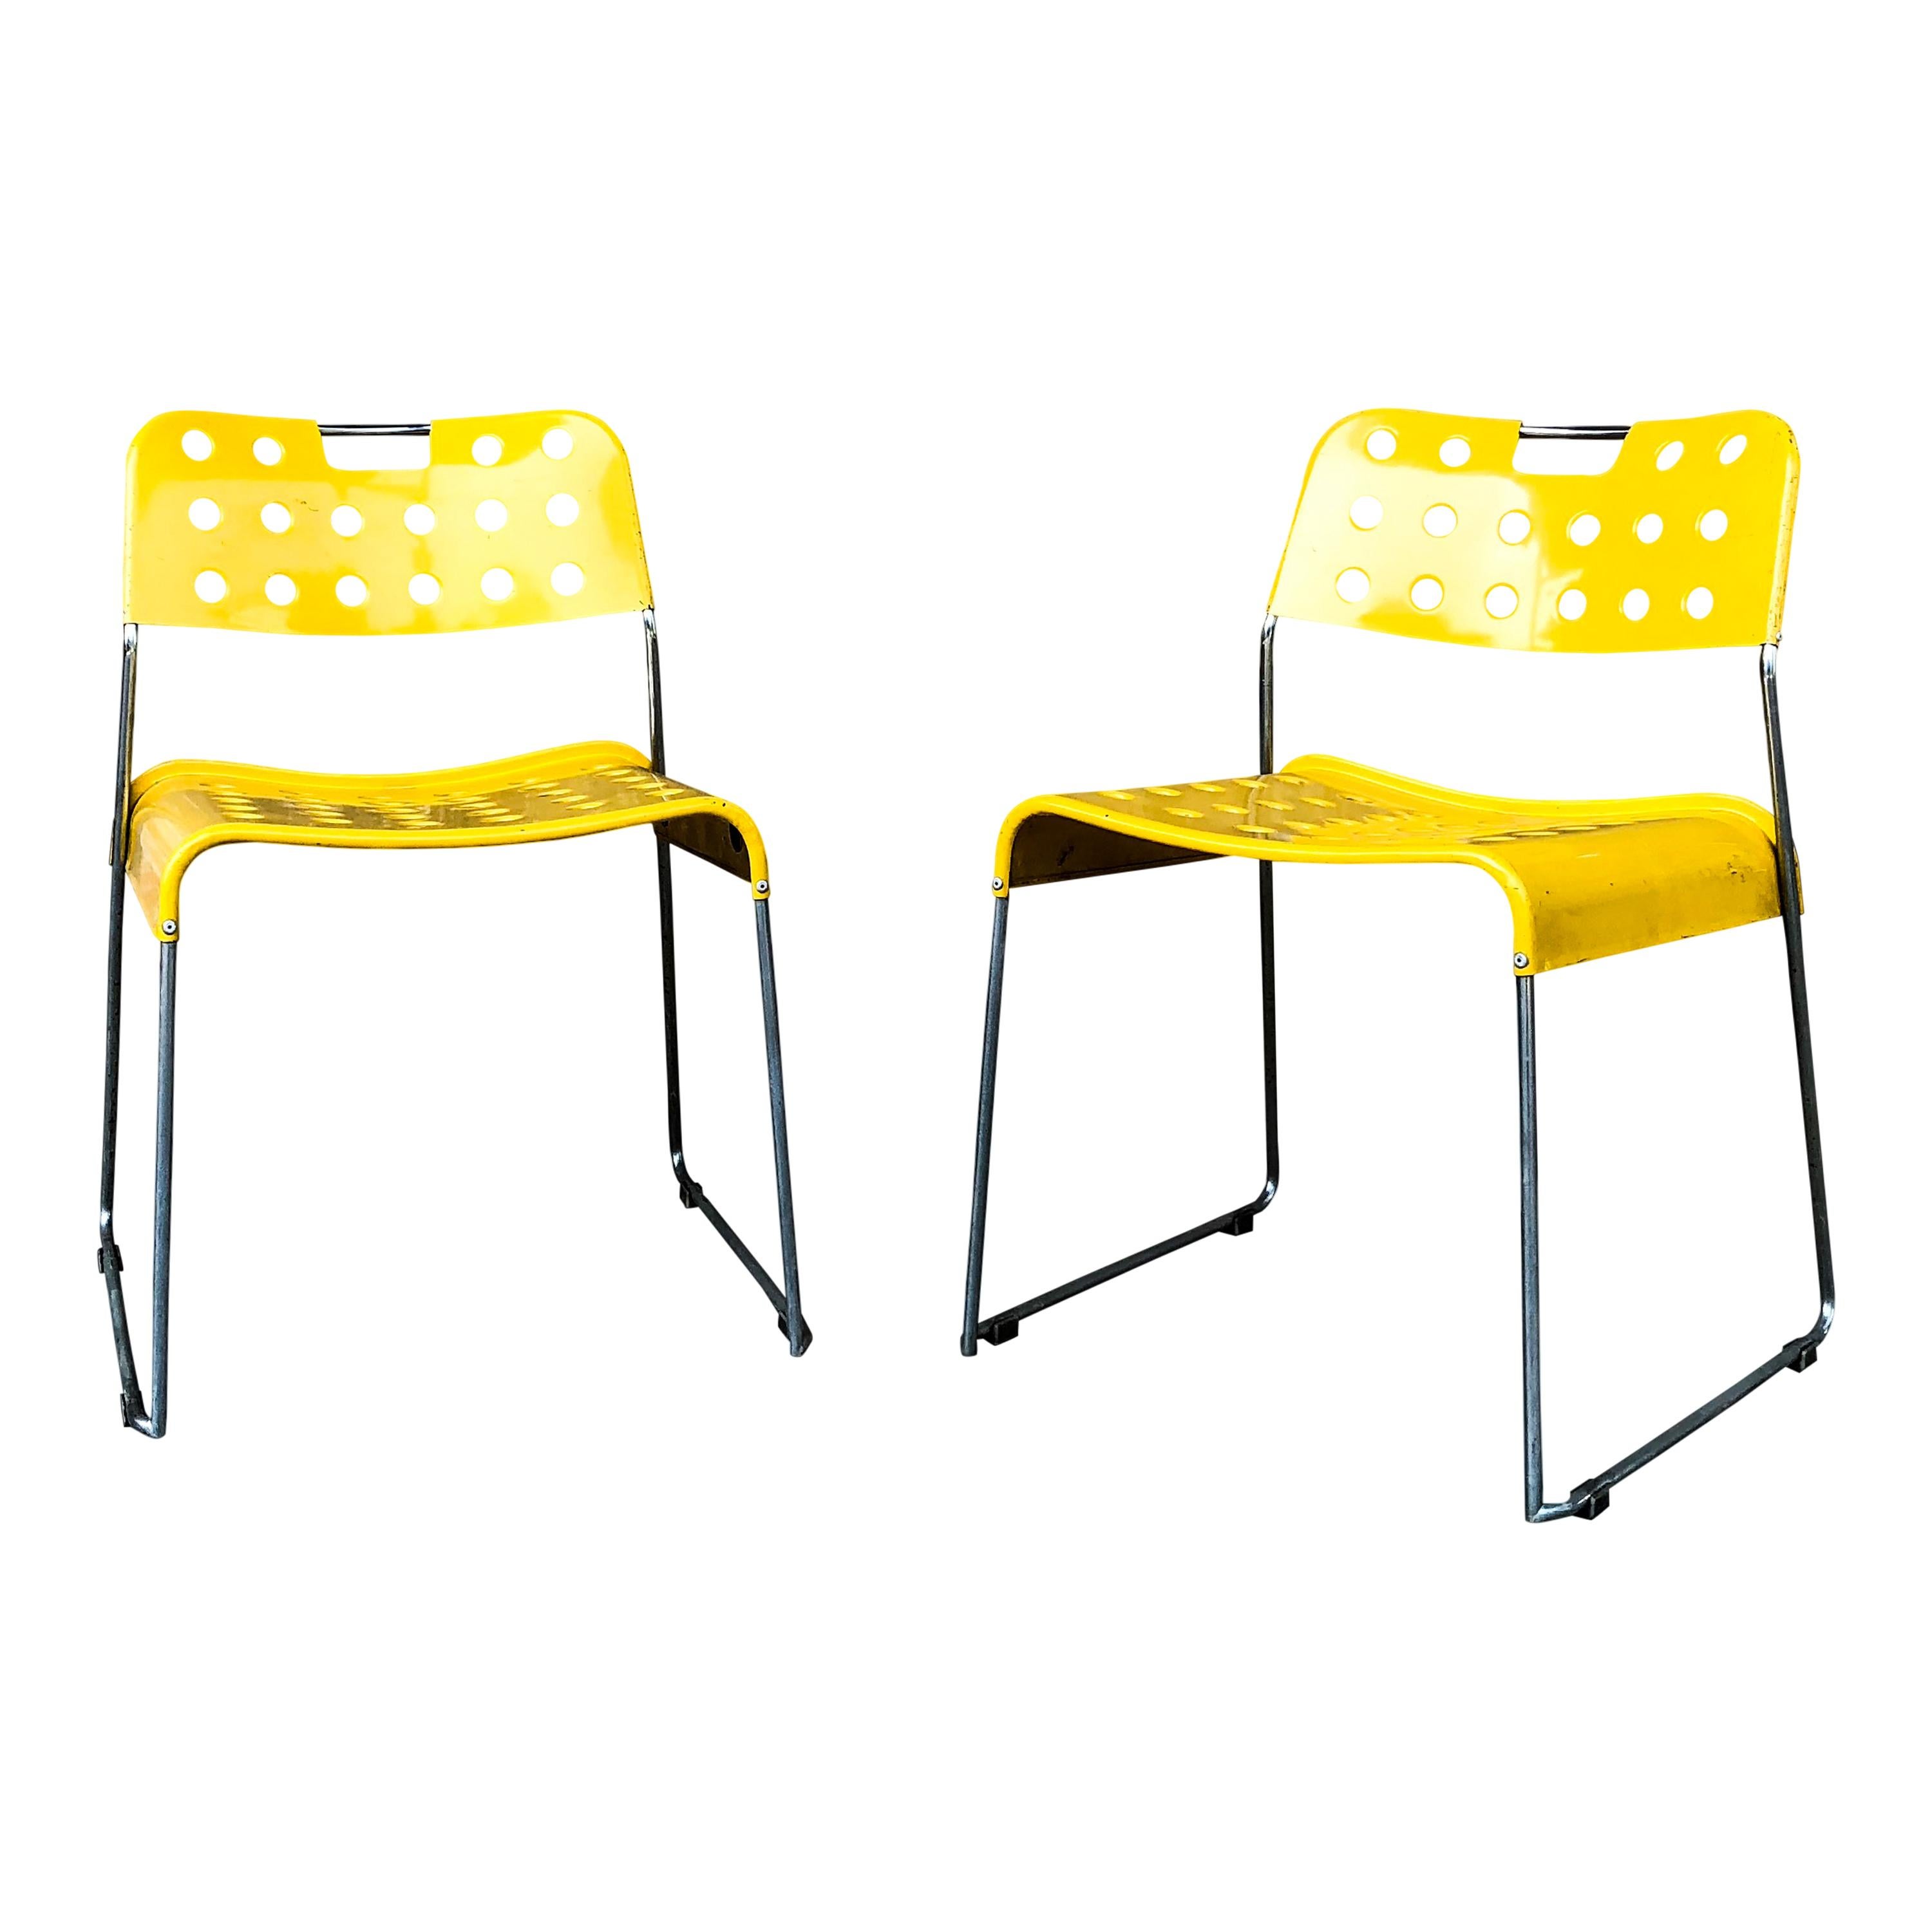 Rodney Kinsman Space Age Yellow Omstak Chair for Bieffeplast, 1971, Set of 4 For Sale 7